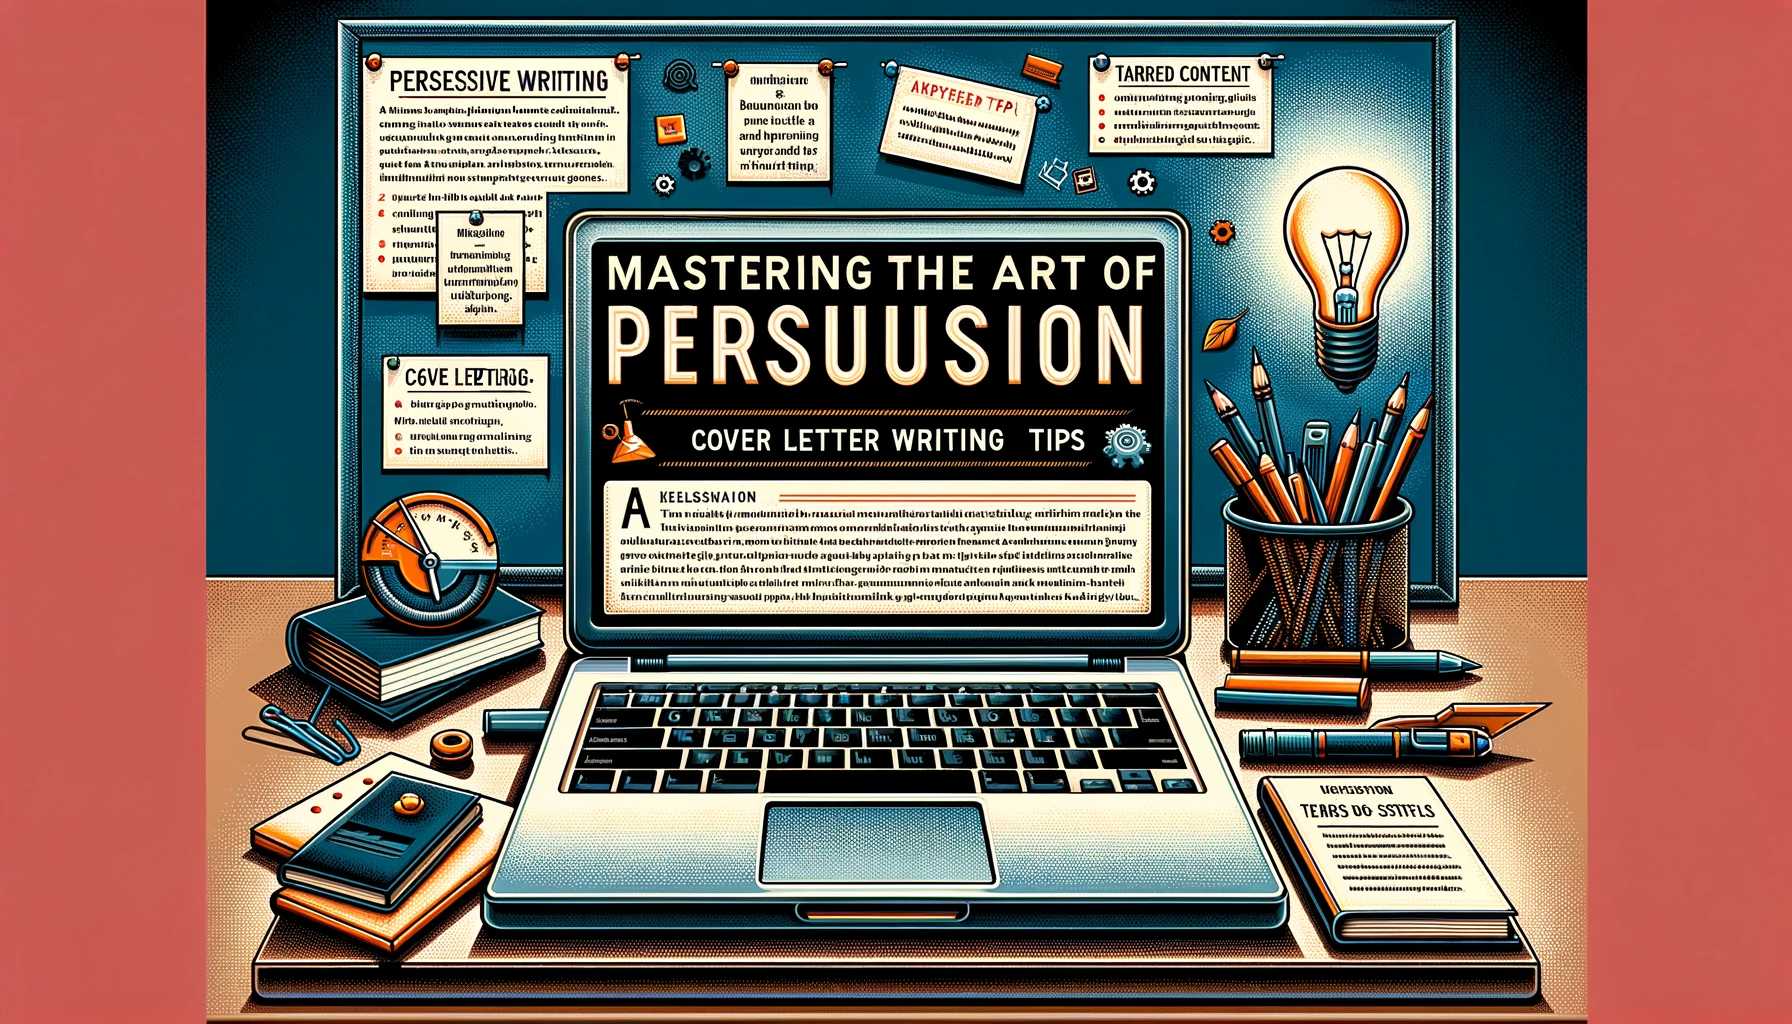 Mastering the Art of Persuasion: Cover Letter Writing Tips